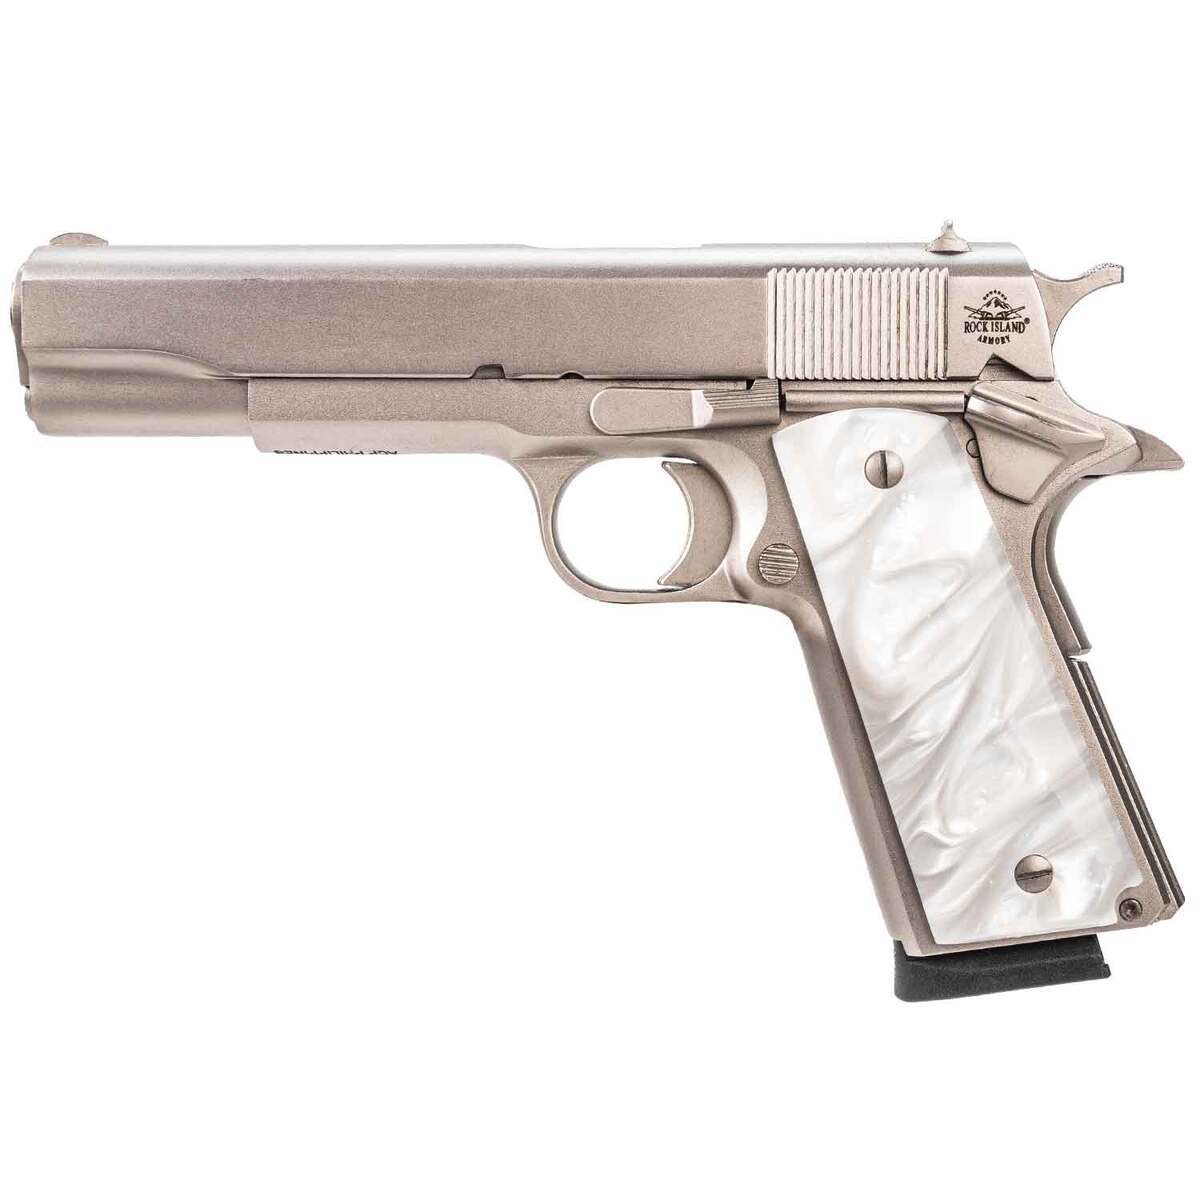 Rock Island Armory M1911 A1 Gi 45 Auto Acp 5in Matte Nickle Pistol 81 Rounds Sportsmans 0105